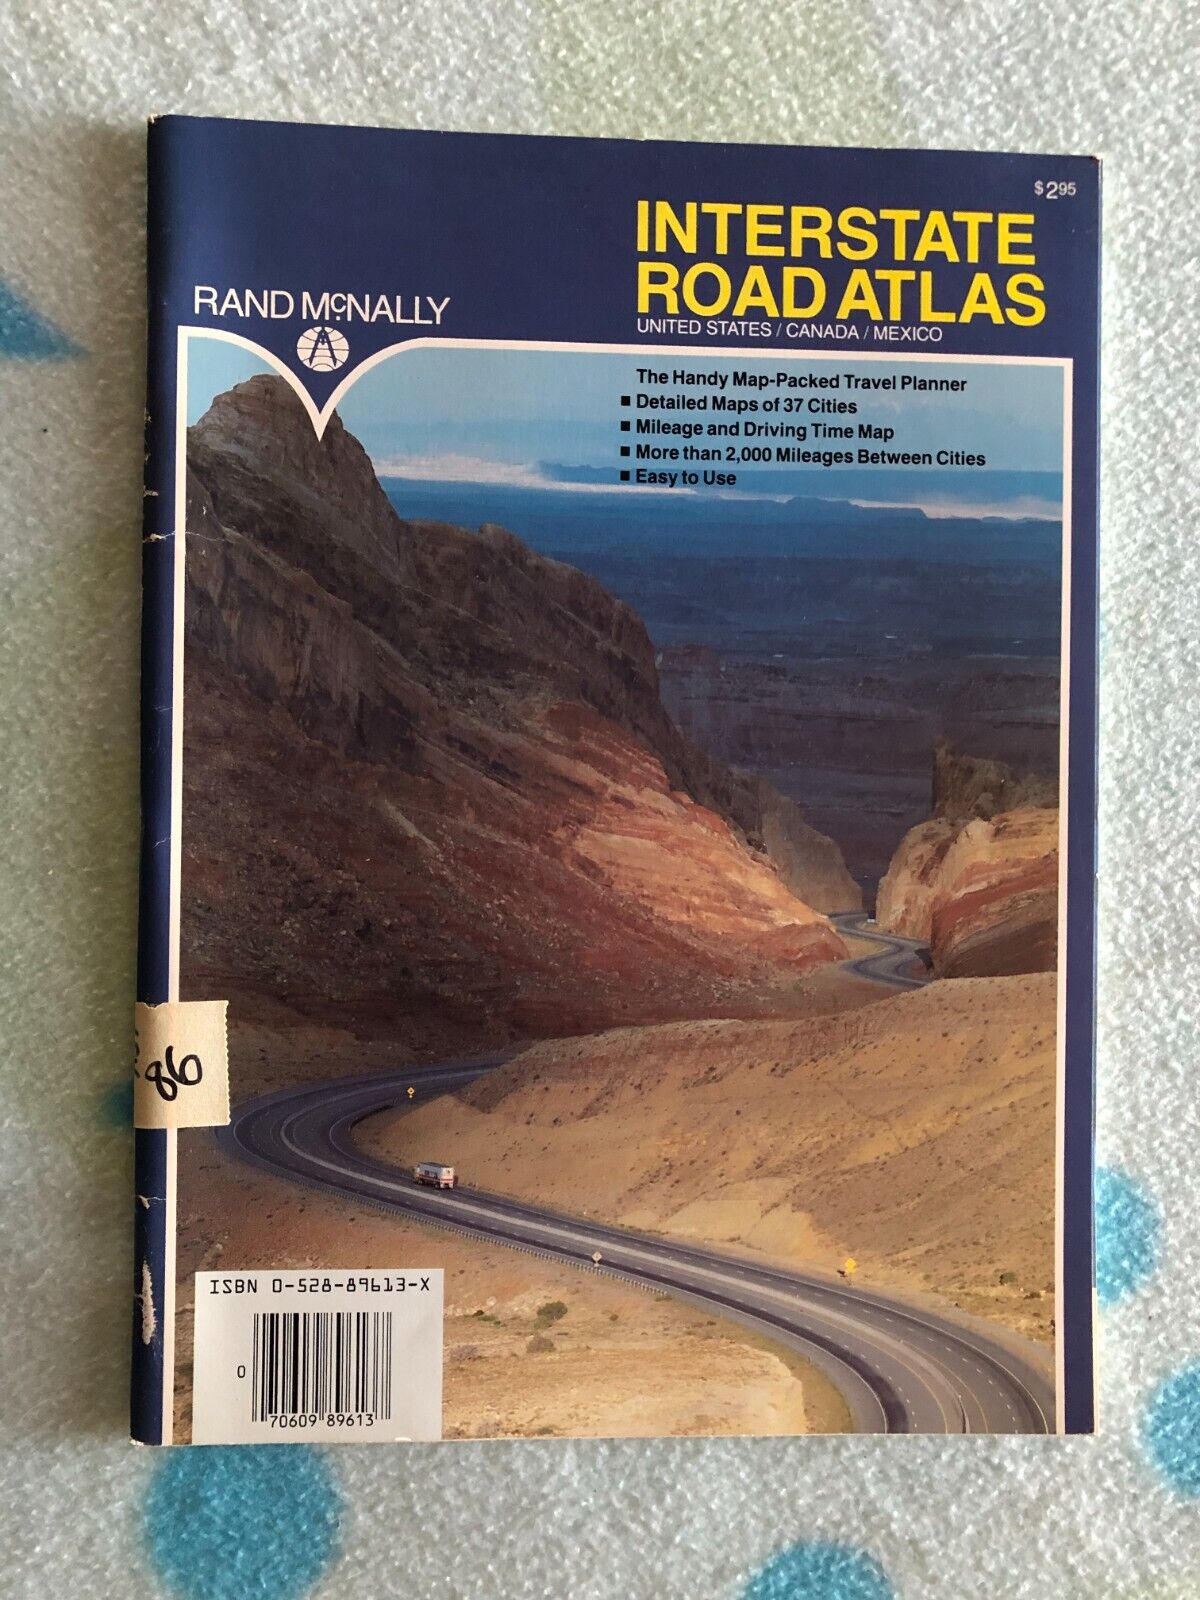 791 - Rand Mcnally Interstate Road Atlas - 1986 - 80 Pages